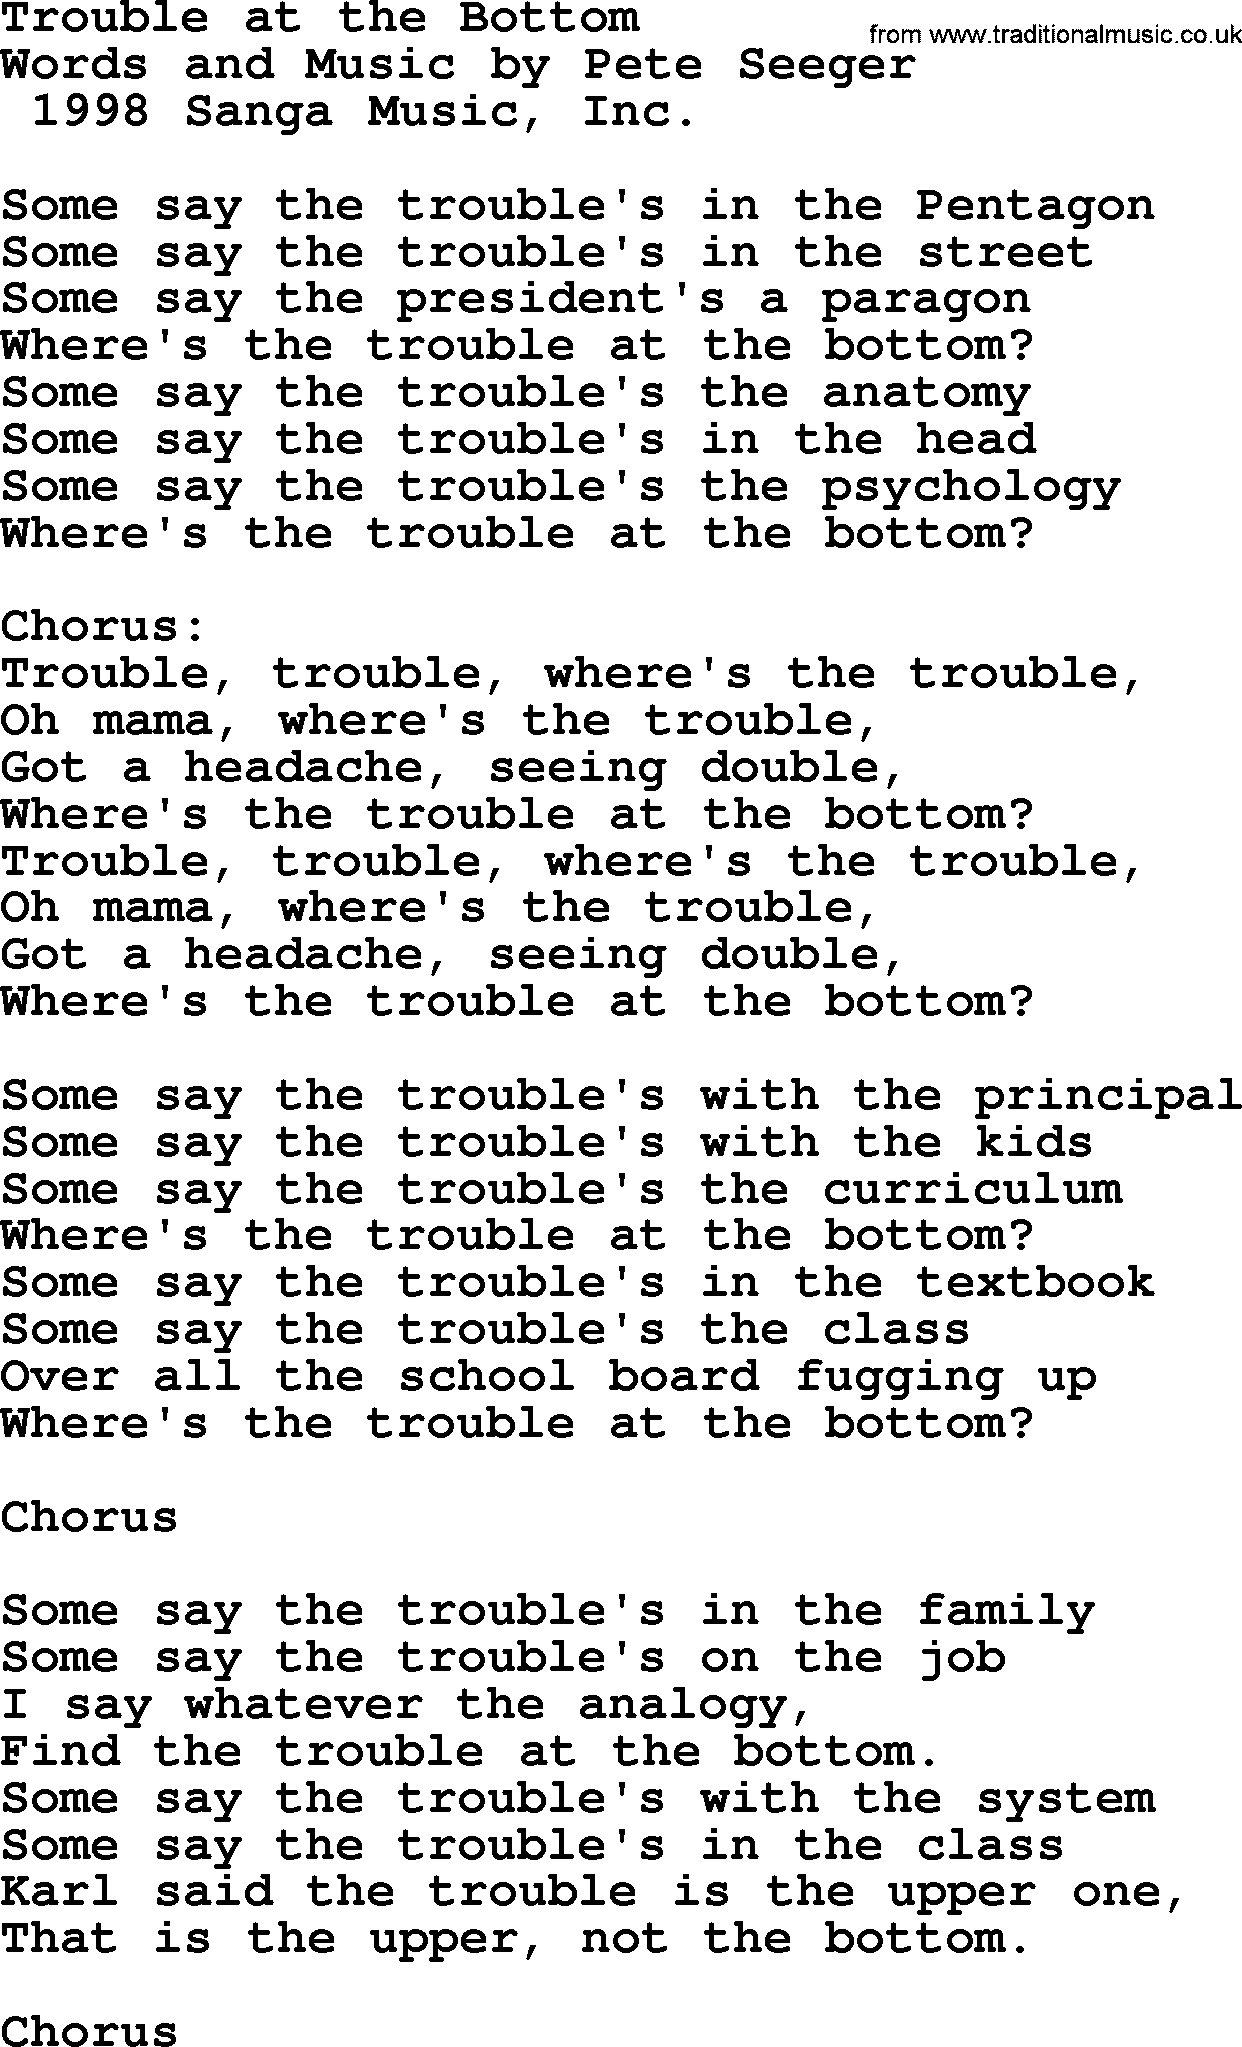 Pete Seeger song Trouble at the Bottom-Pete-Seeger.txt lyrics